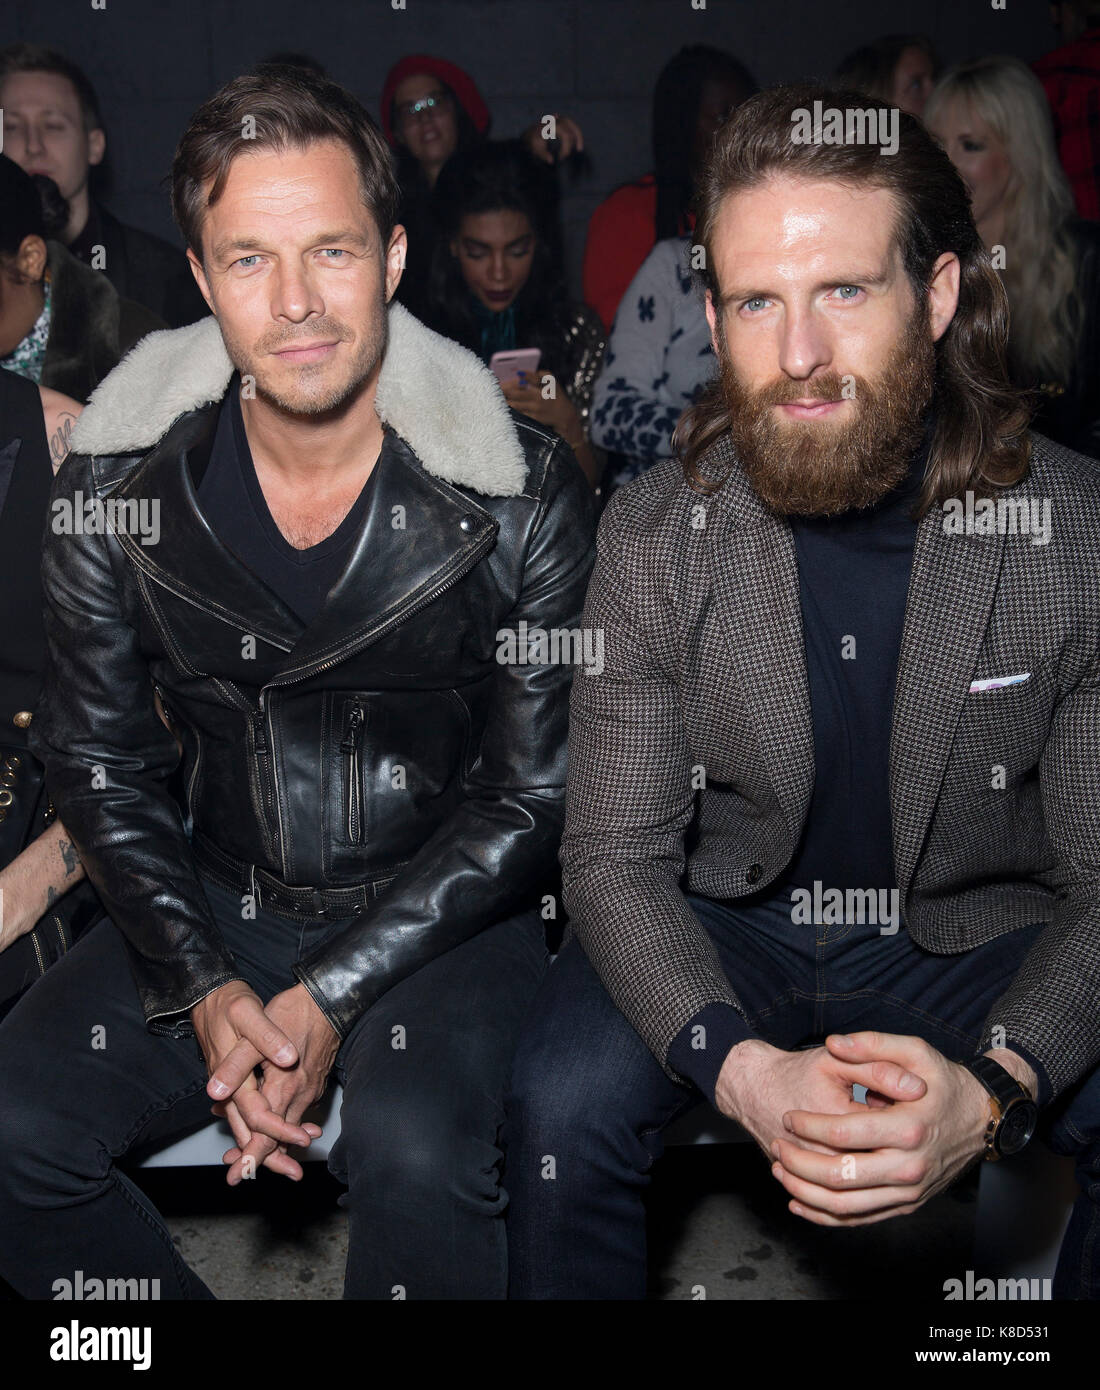 Paul Sculfor, left, and Craig McGinlay on the front row during the Julien Macdonald London Fashion Week SS18 show held at No 1 Invicta Plaza, London Stock Photo